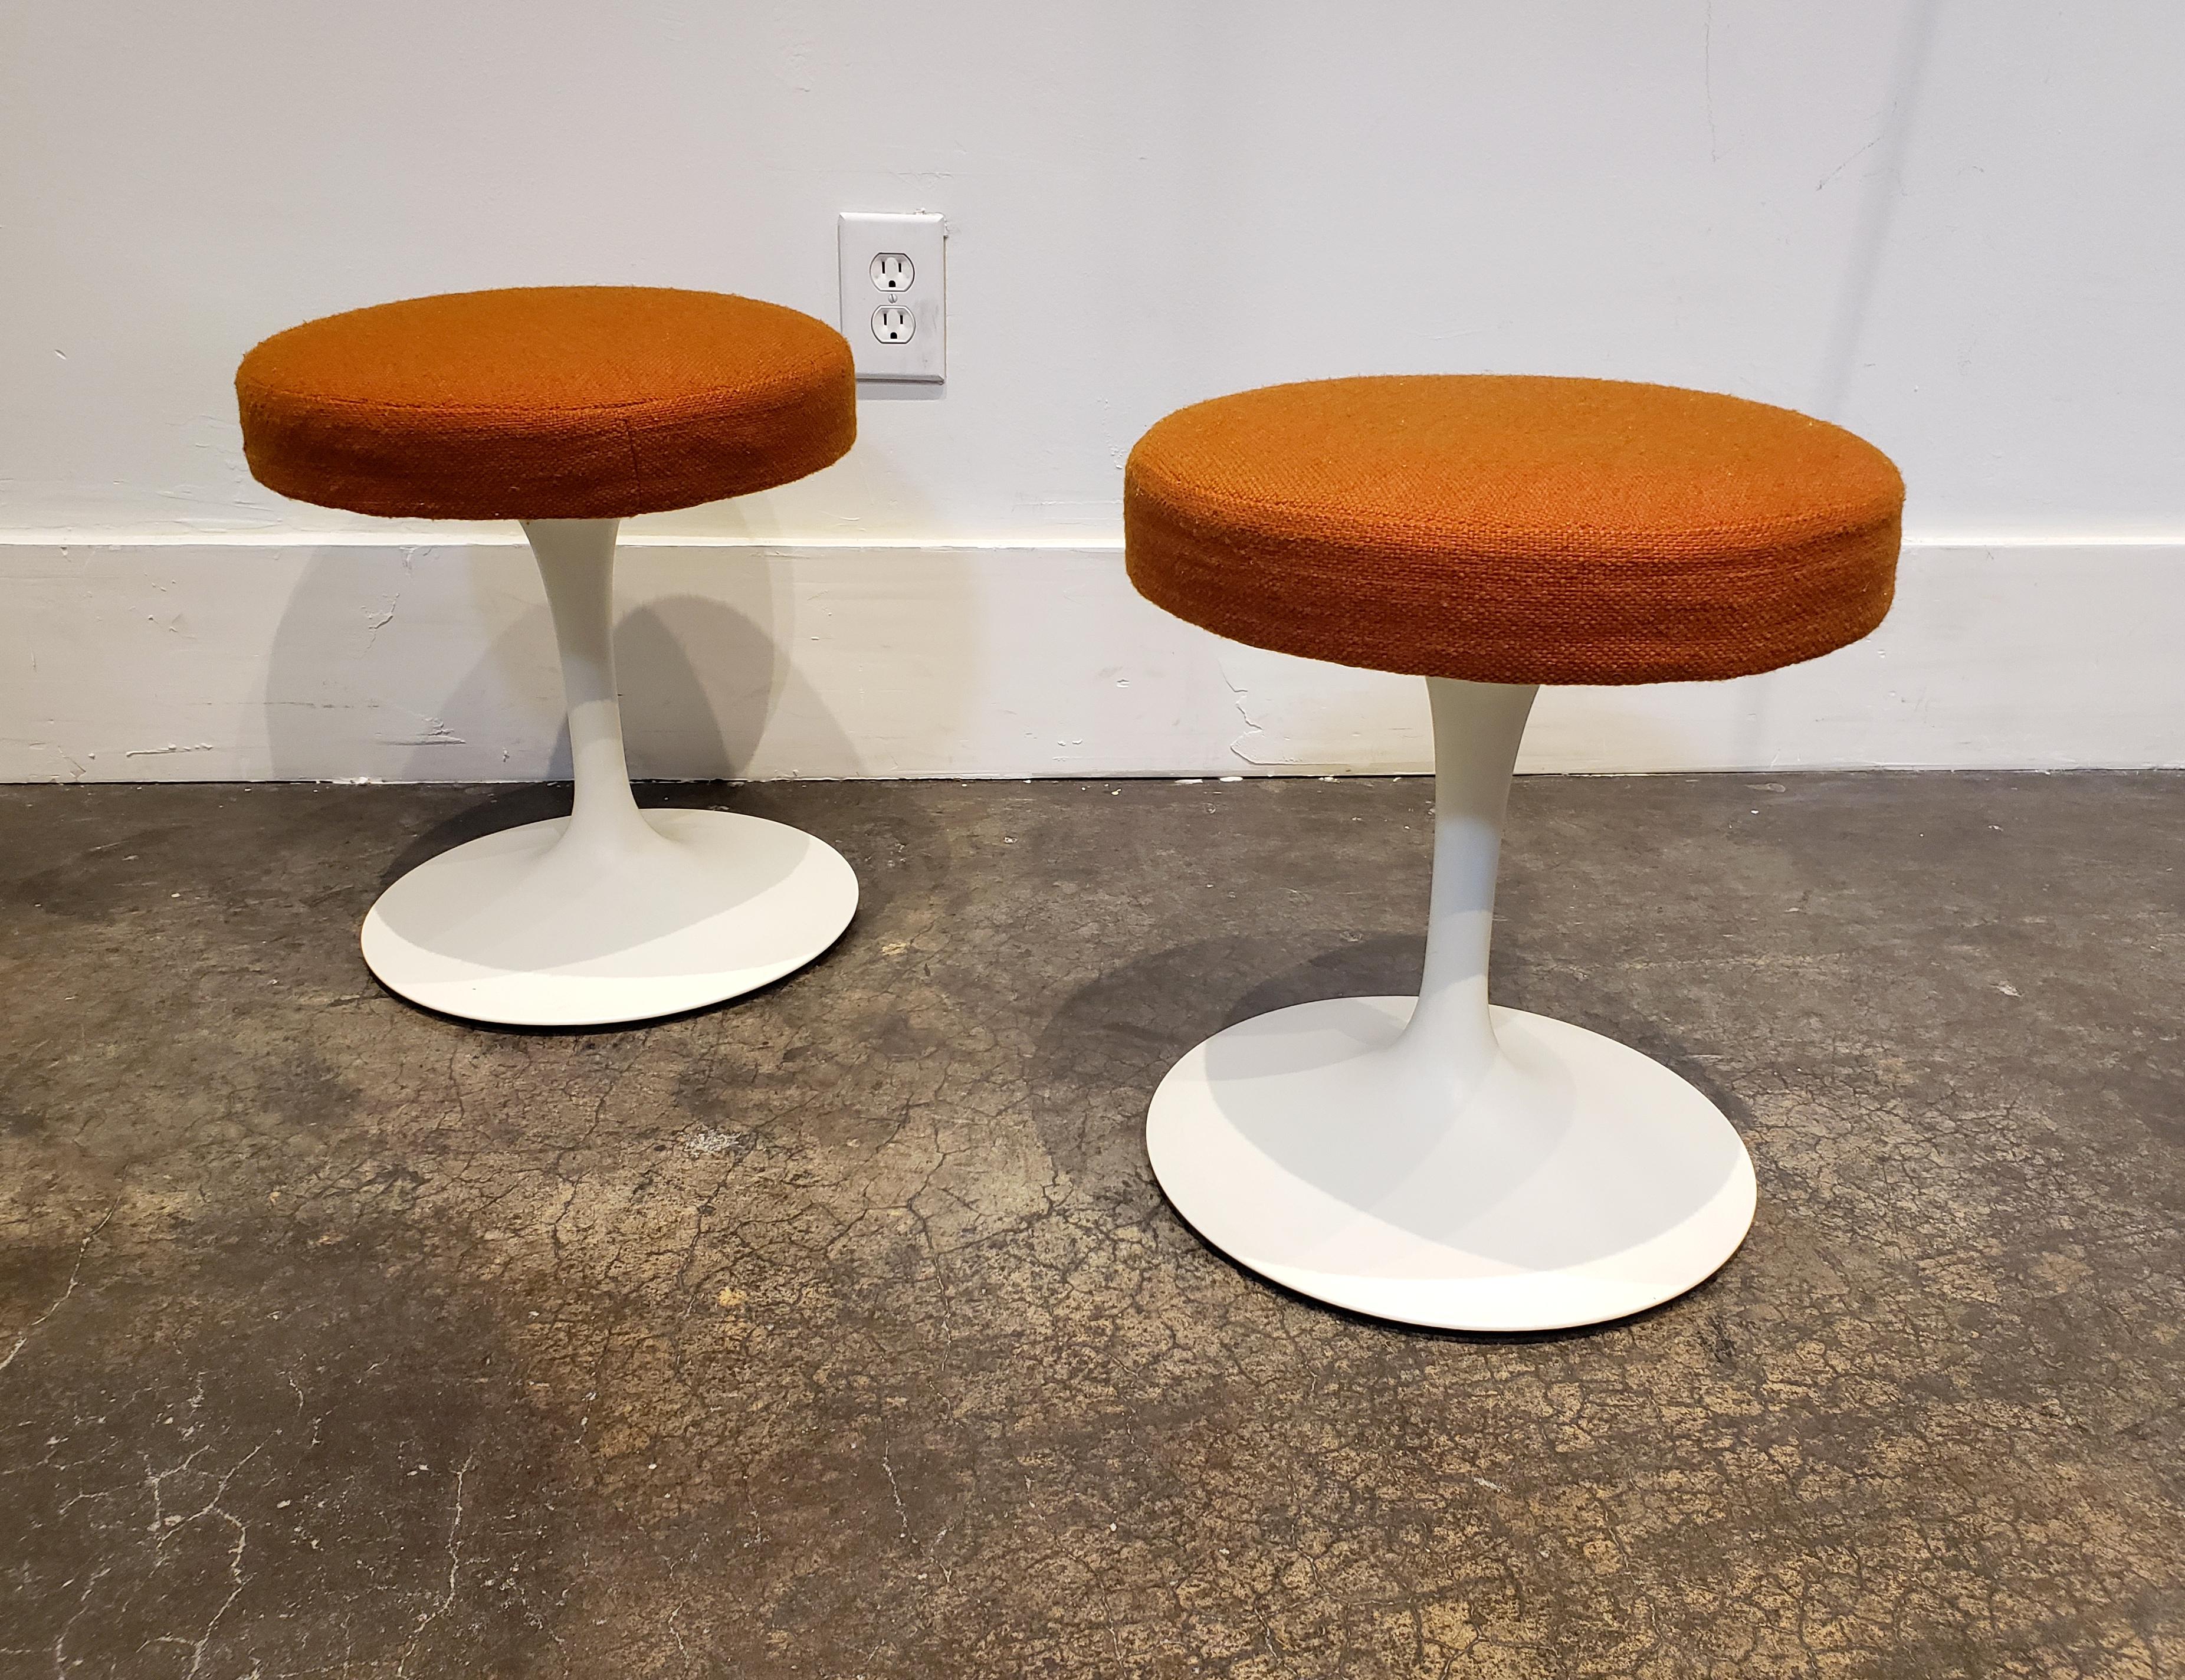 Pair of early 1970s Knoll Tulip stools designed by Eero Saarinen. In amazing condition! Original wool-blend fabric and aluminum base both have only very light wear. Original labels are still attached (see pictures). Both are clean and ready to use.